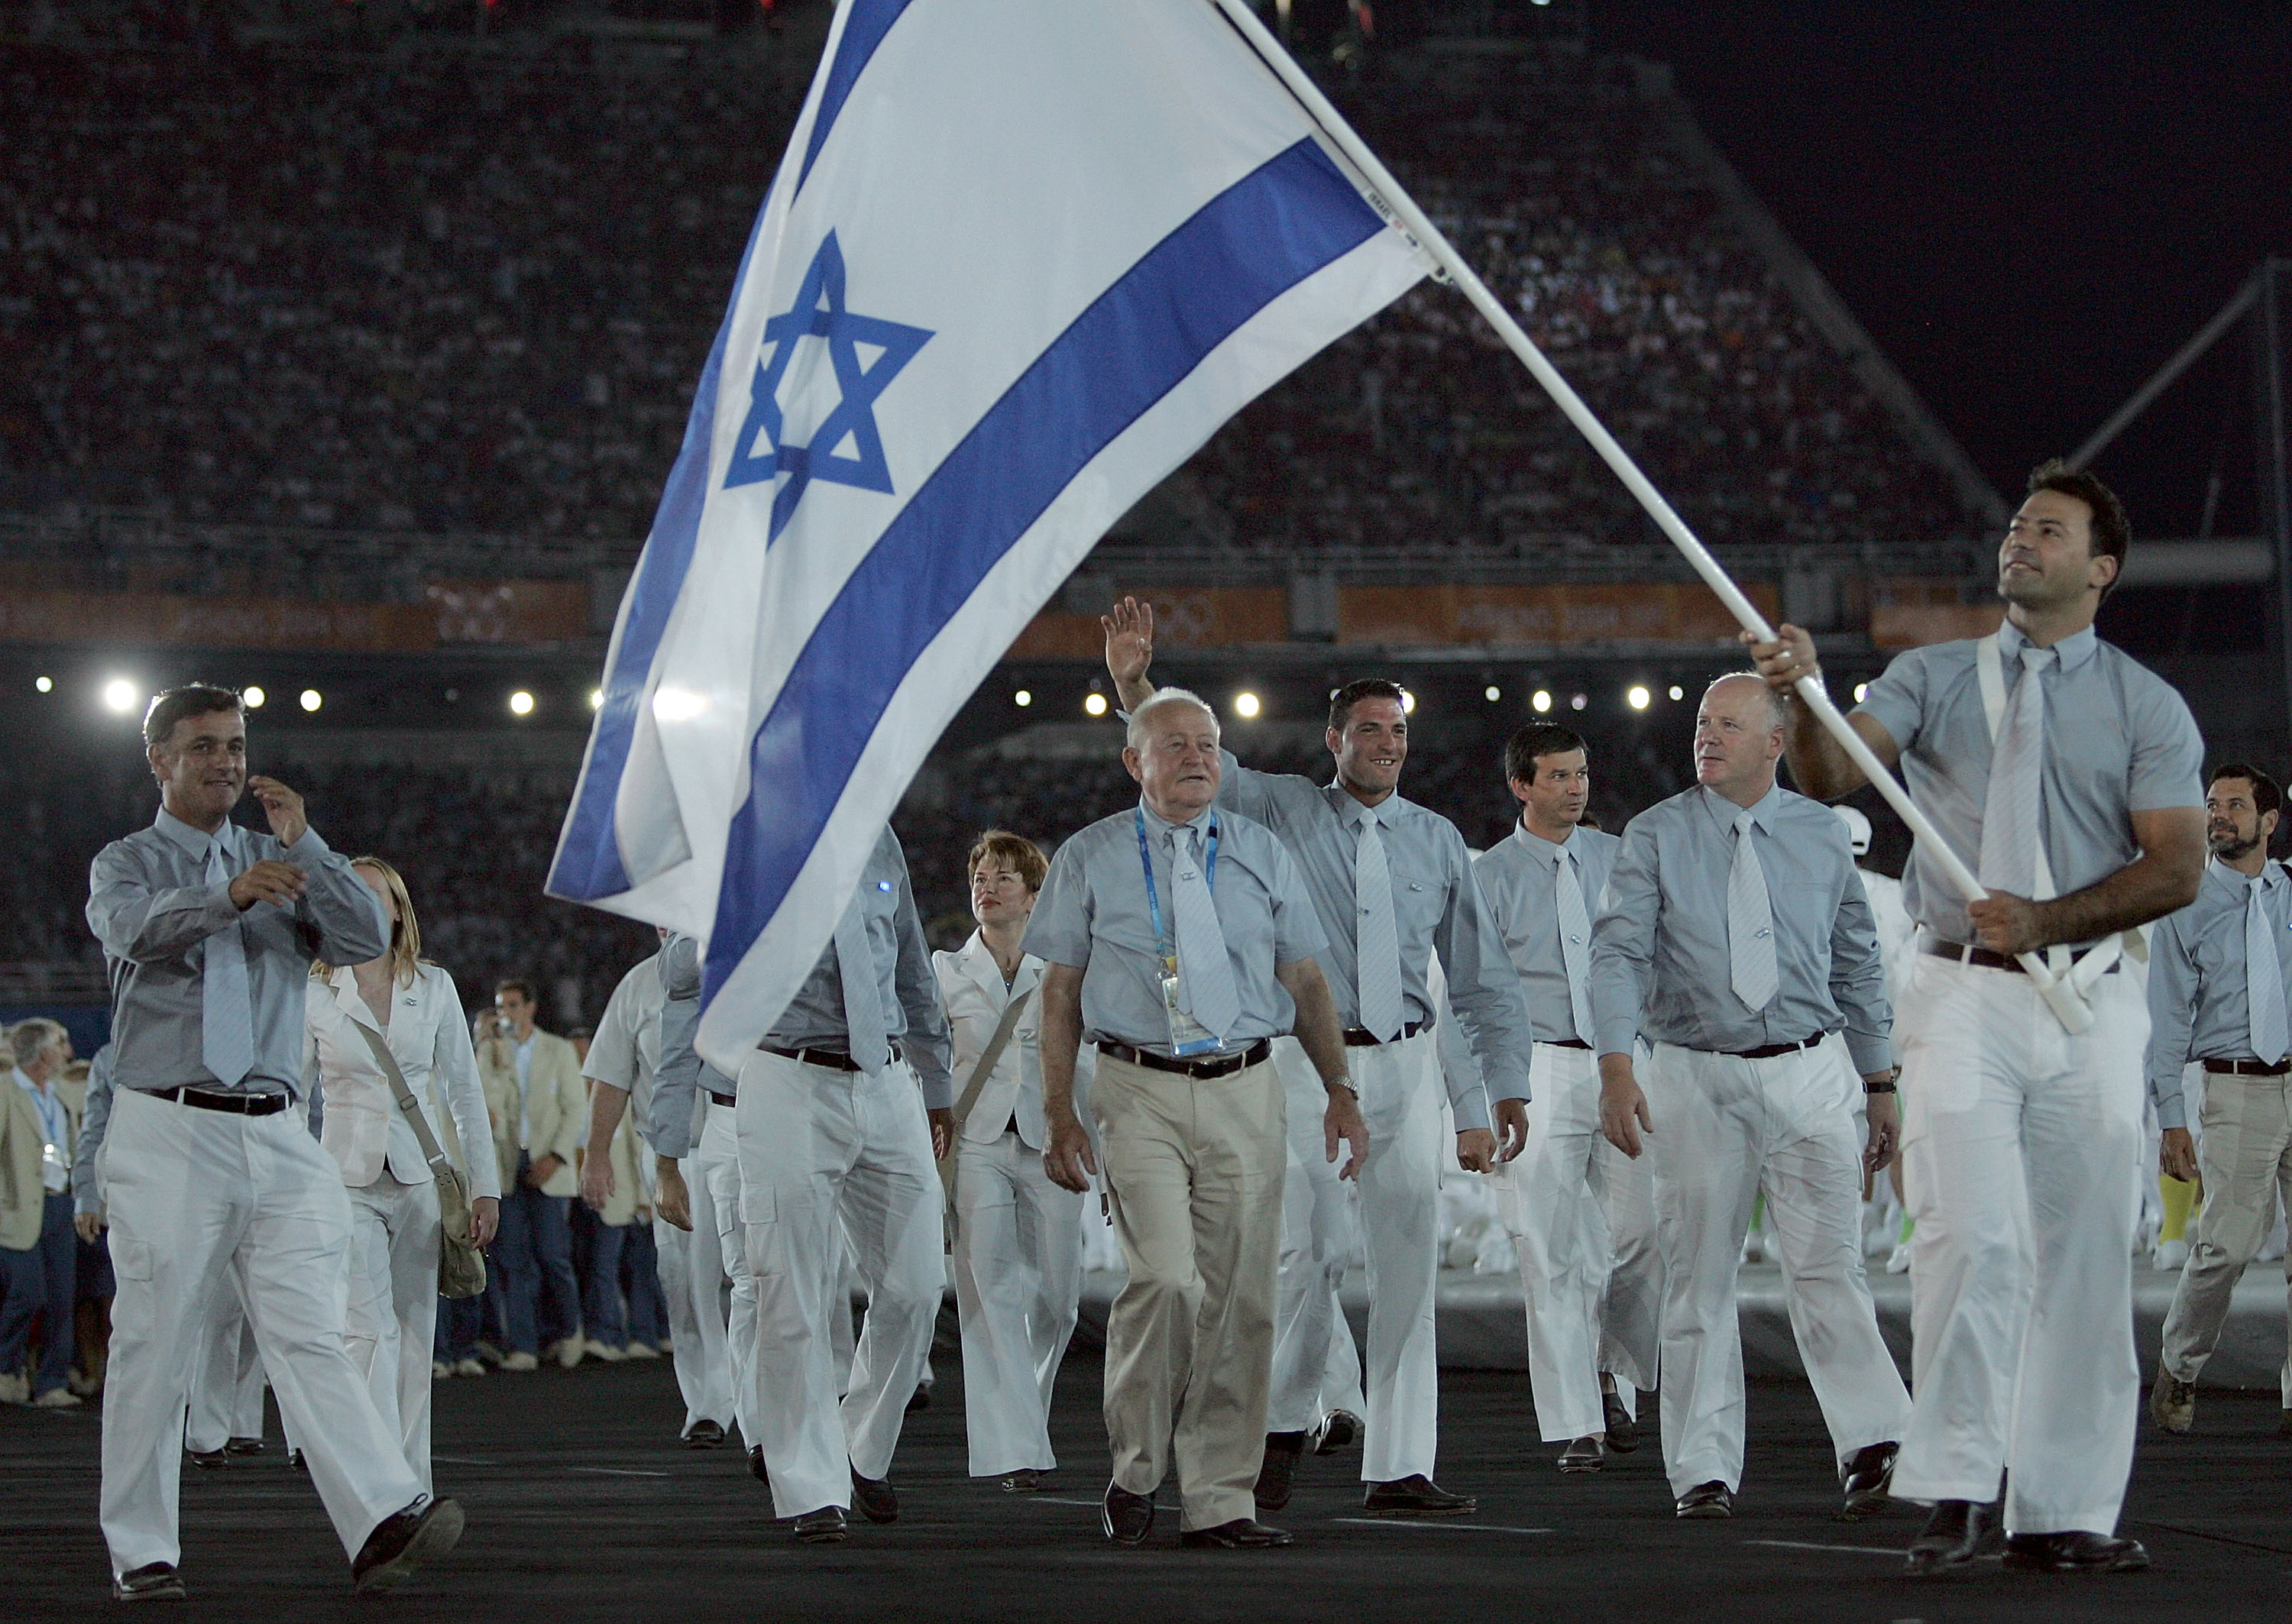 ATHENS - AUGUST 13:  Flag bearer Ariel Zeevie leads Team Israel during opening ceremonies for the Athens 2004 Summer Olympic Games on August 13, 2004 at the Sports Complex Olympic Stadium in Athens, Greece.  (Photo by Jamie Squire/Getty Images)